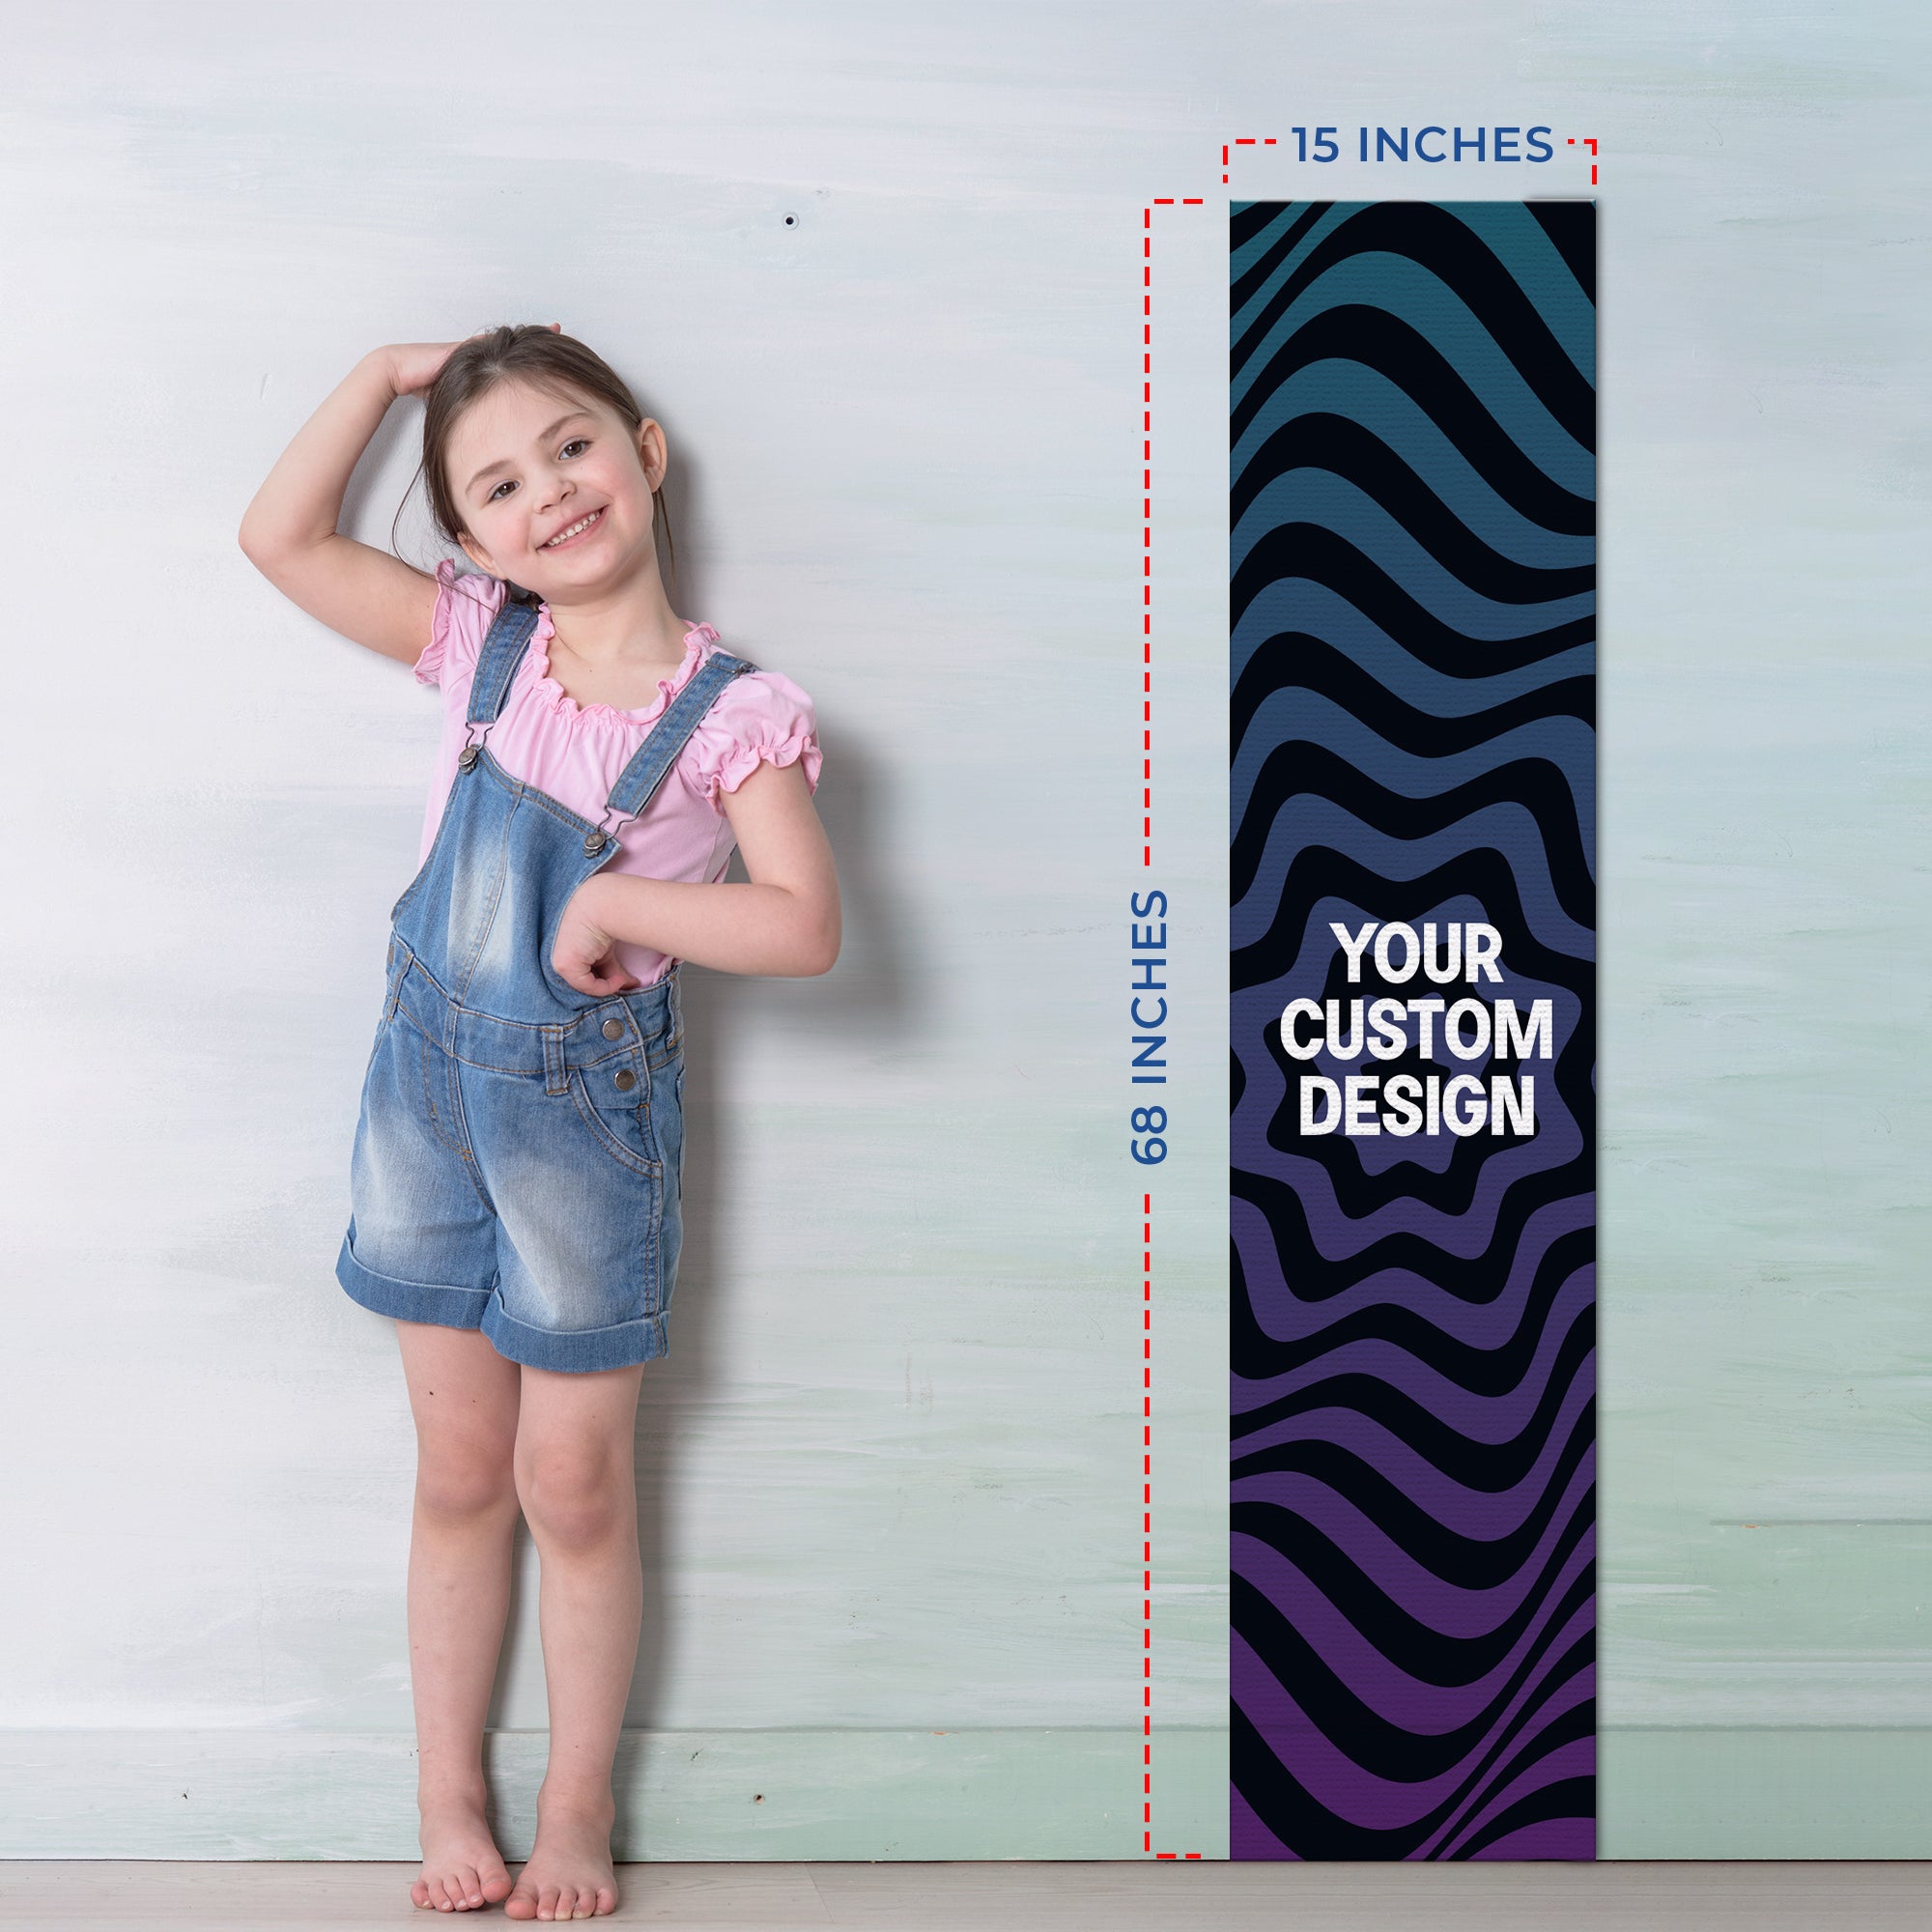 Growth Chart Kids - Make Your Own